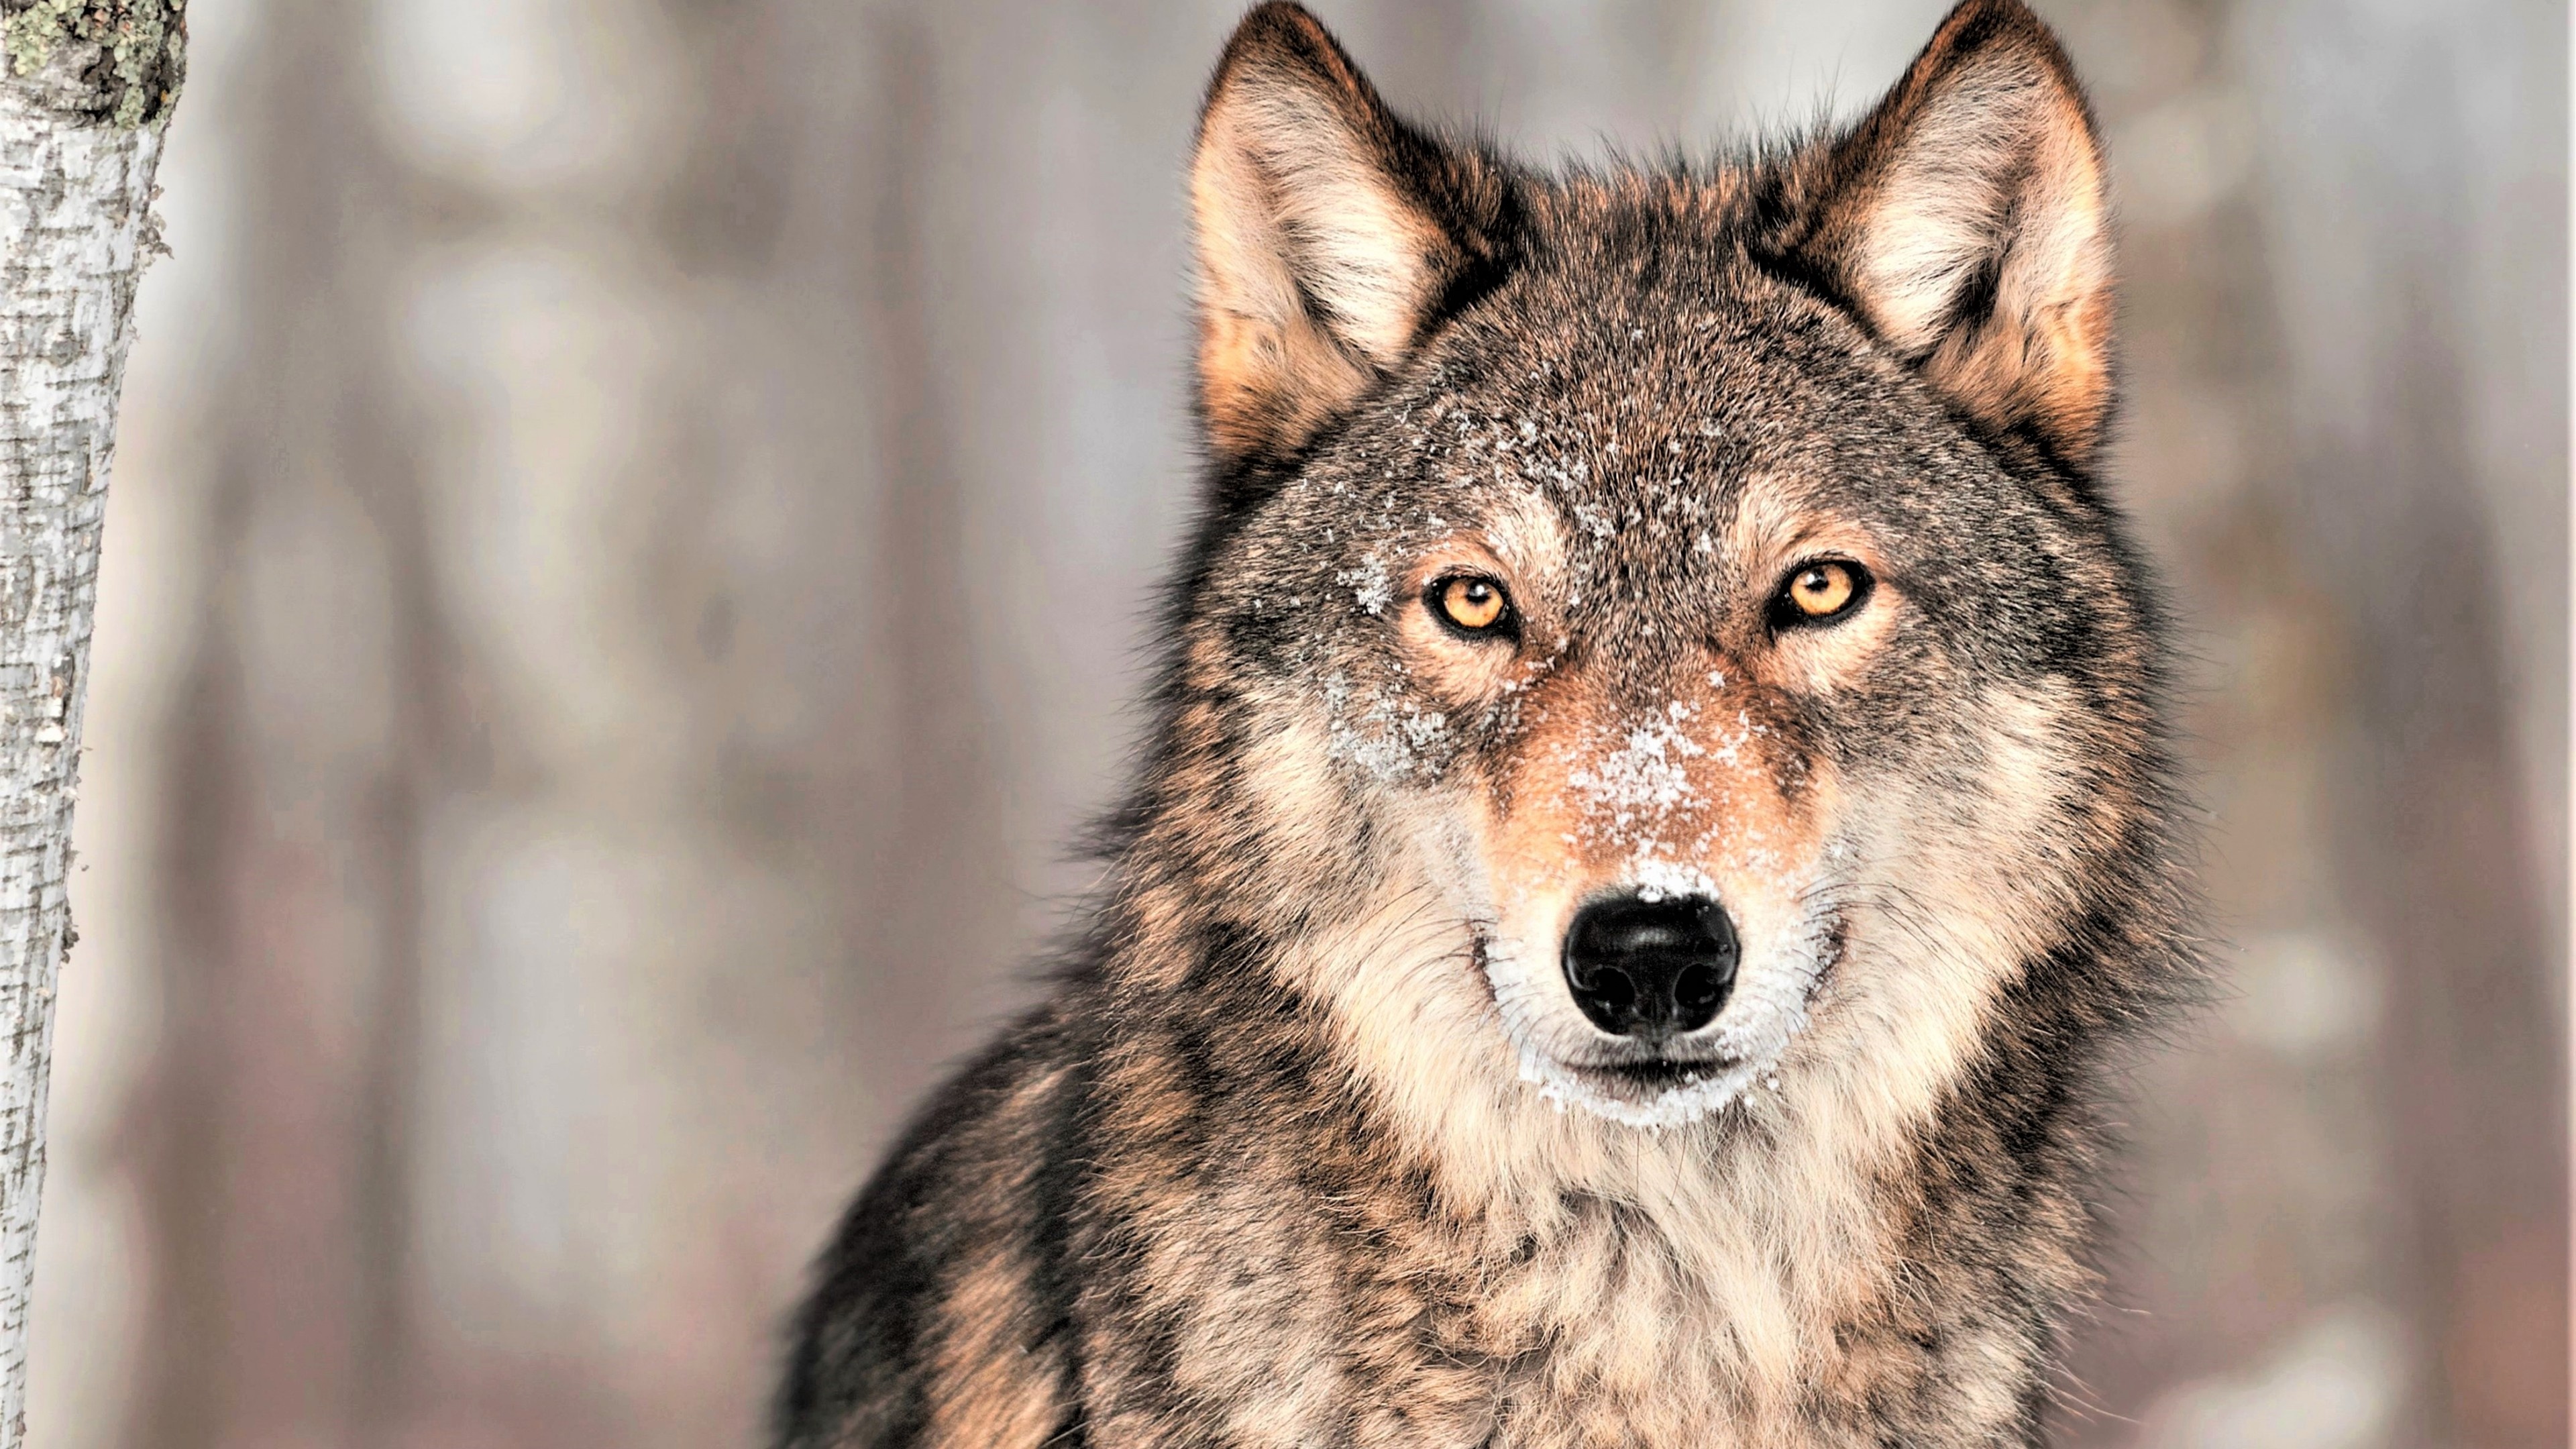 Gray Wolf: The largest extant member of the family Canidae, Banded fur mottled white, brown and black. 3840x2160 4K Wallpaper.